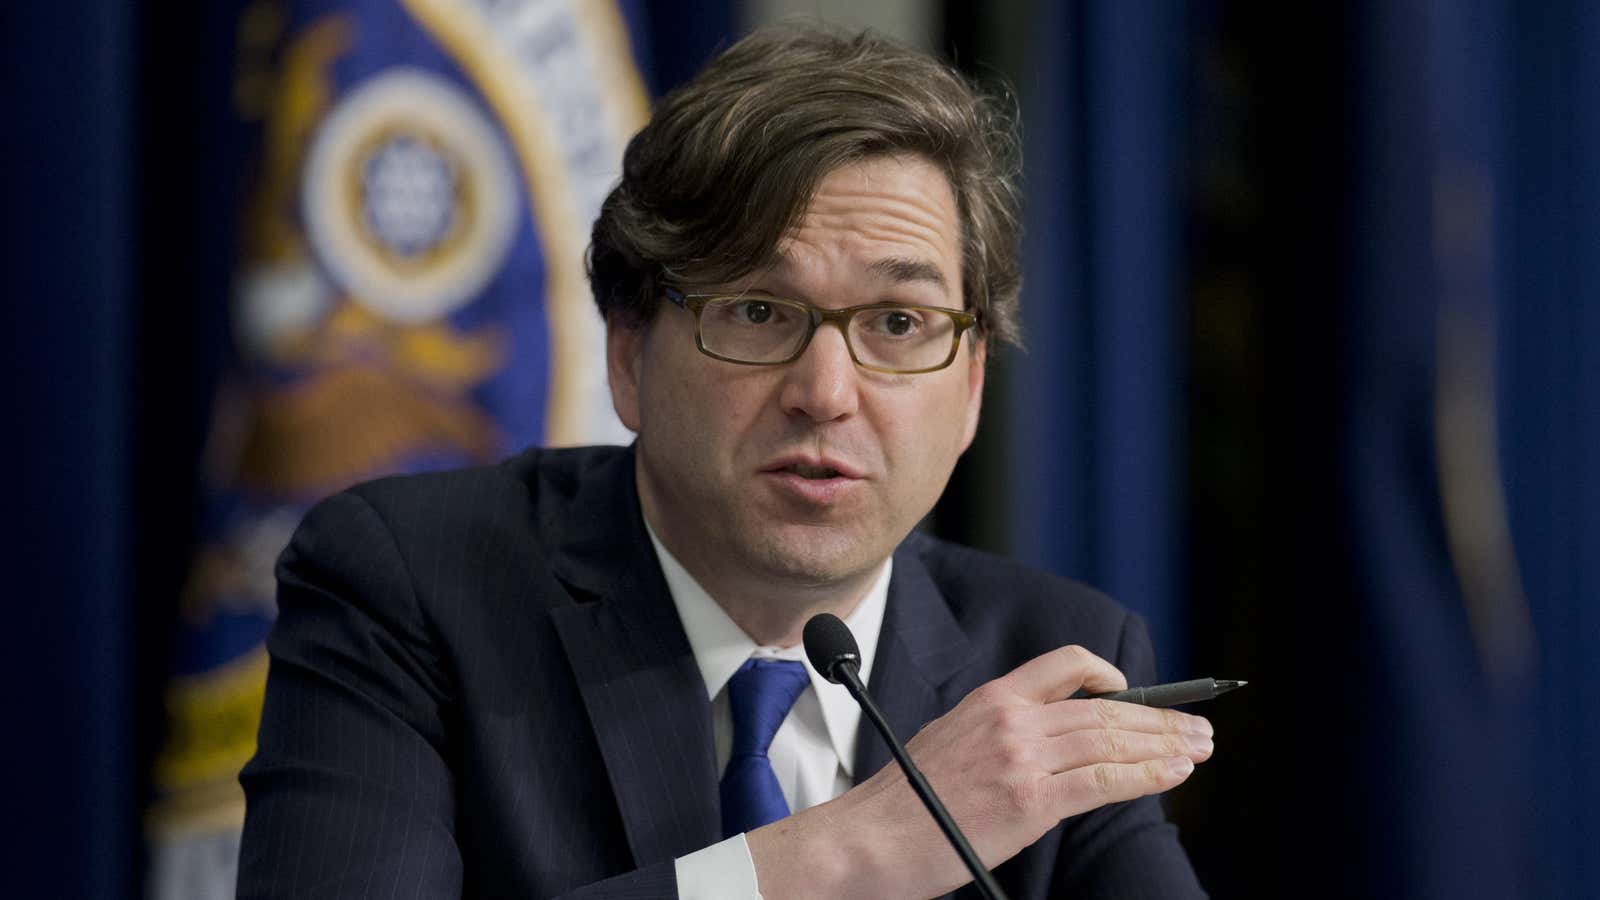 Jason Furman, former Council of Economic Advisers Chairman, joins the fight for ethical machines.